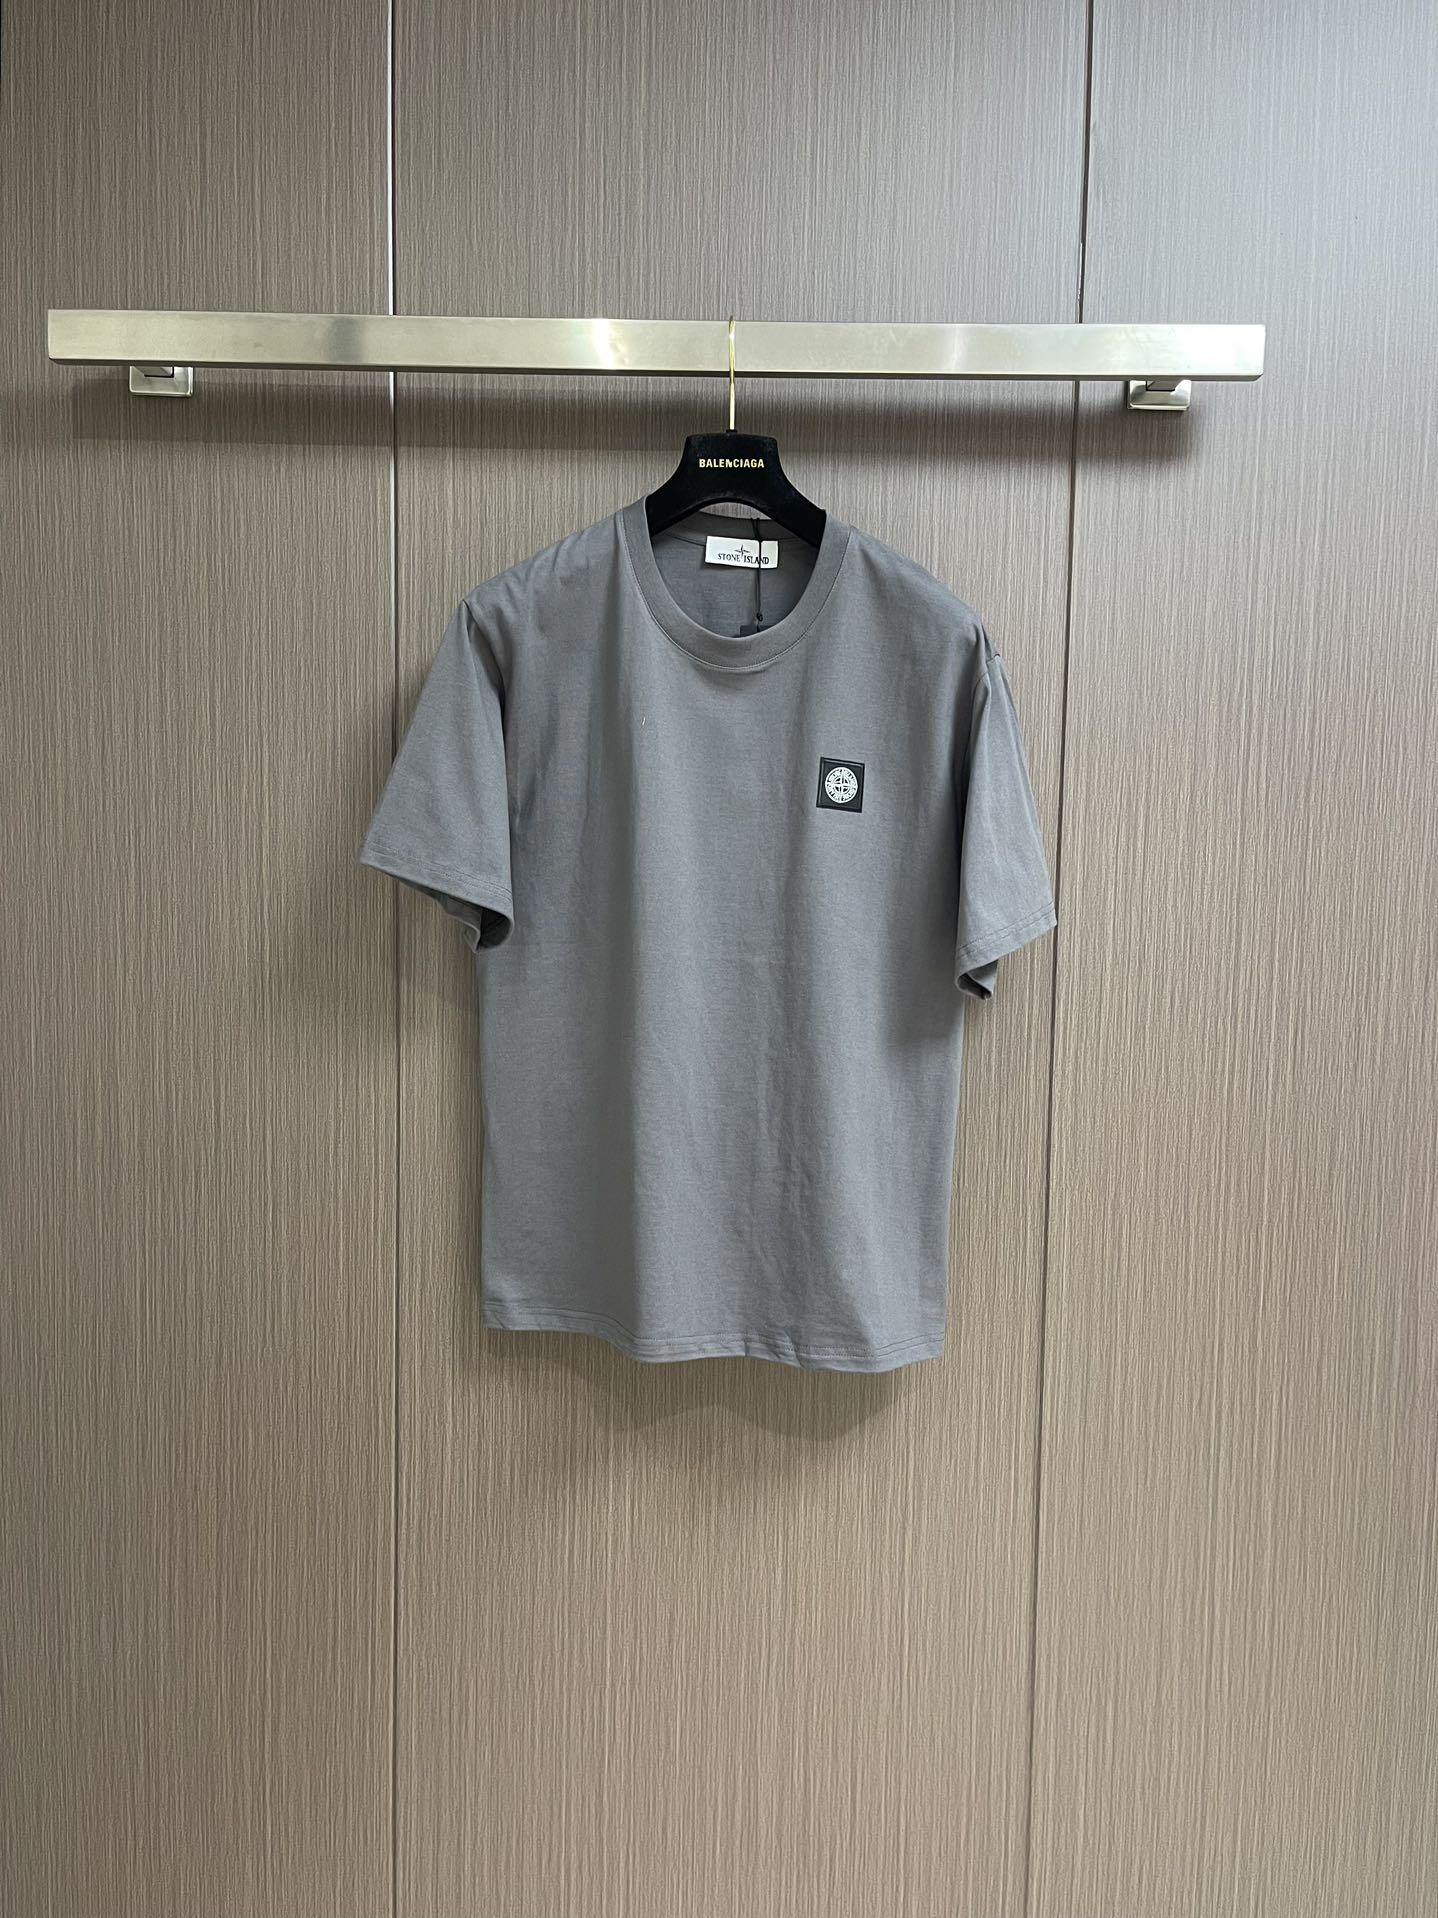 Stone Island Clothing T-Shirt Shop the Best High Authentic Quality Replica
 Cotton Summer Collection Fashion Short Sleeve